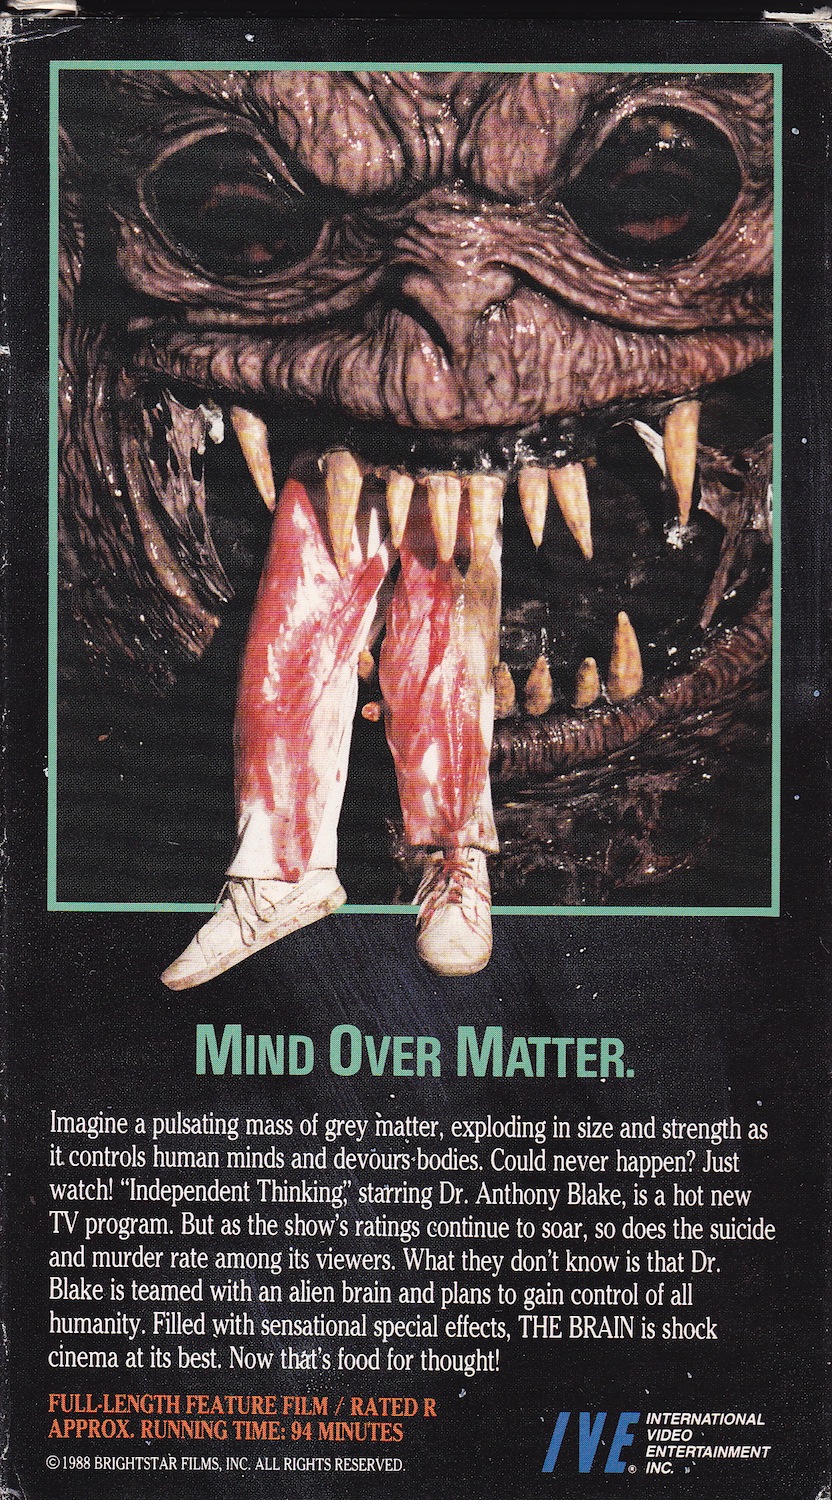 COLLECTING VHS: The Brain (1988)